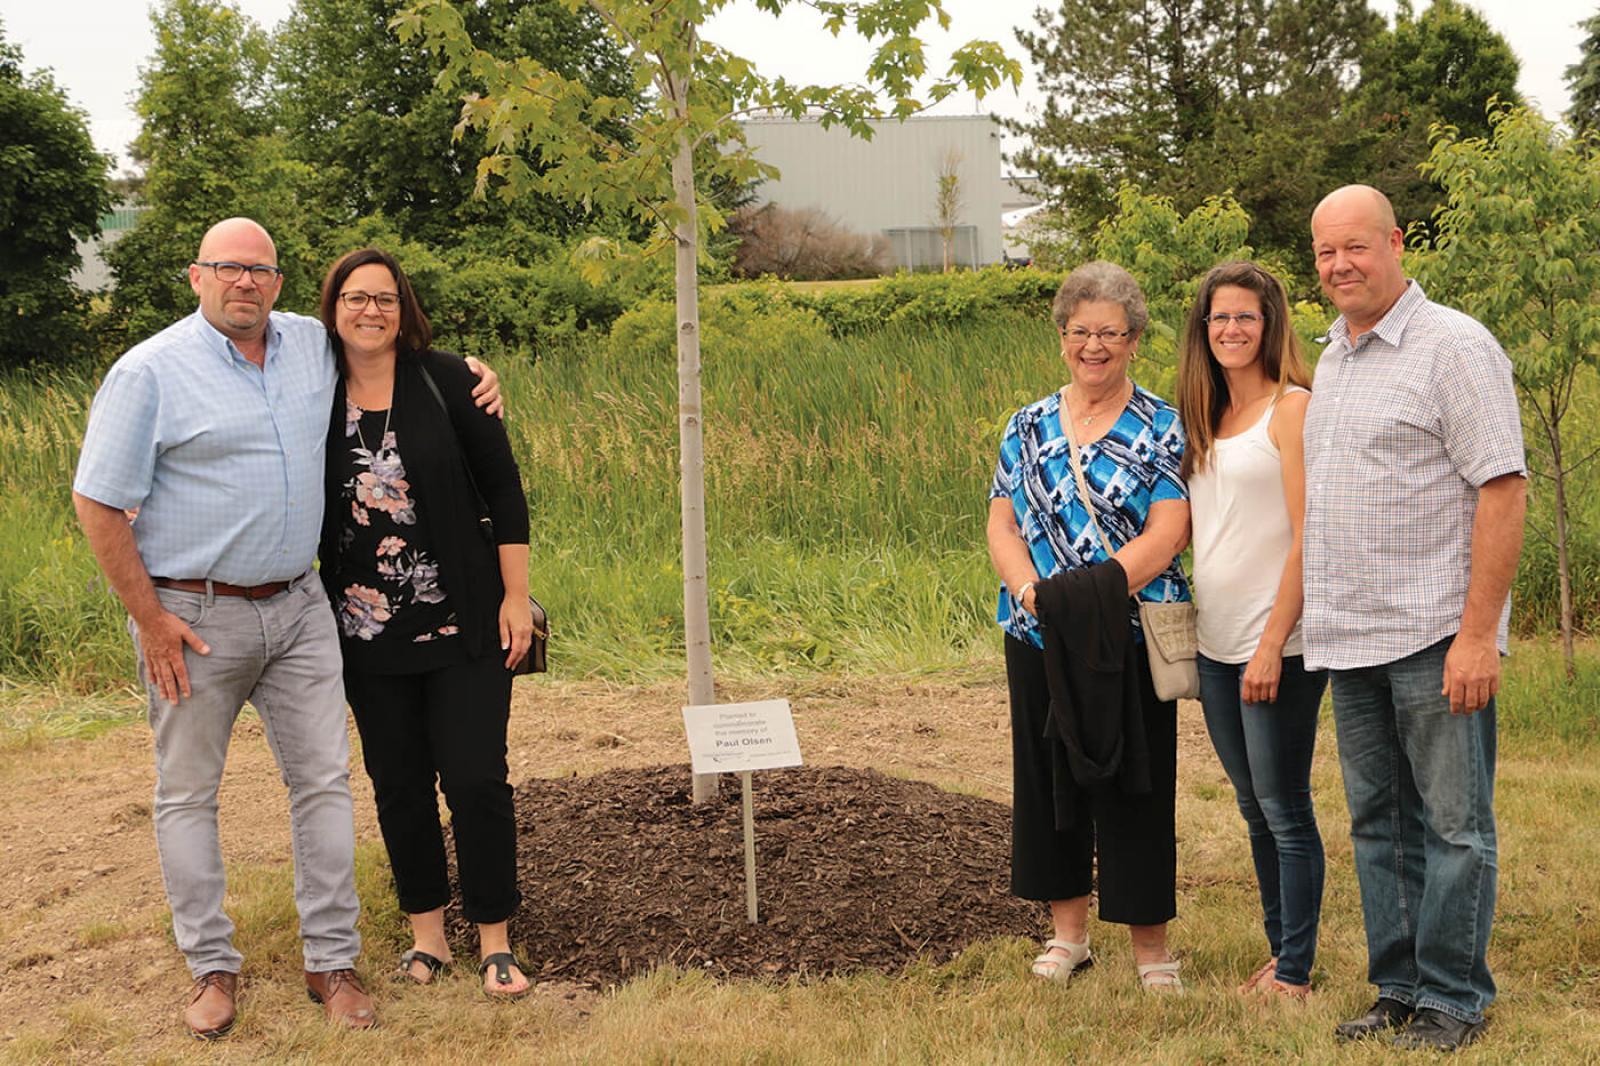 Members of the Olsen family gather around a newly planted Autumn Blaze maple in memory of the late Paul Olsen. (L-R): Jeff, Diane, Linda, Jennifer and Peter Olsen.